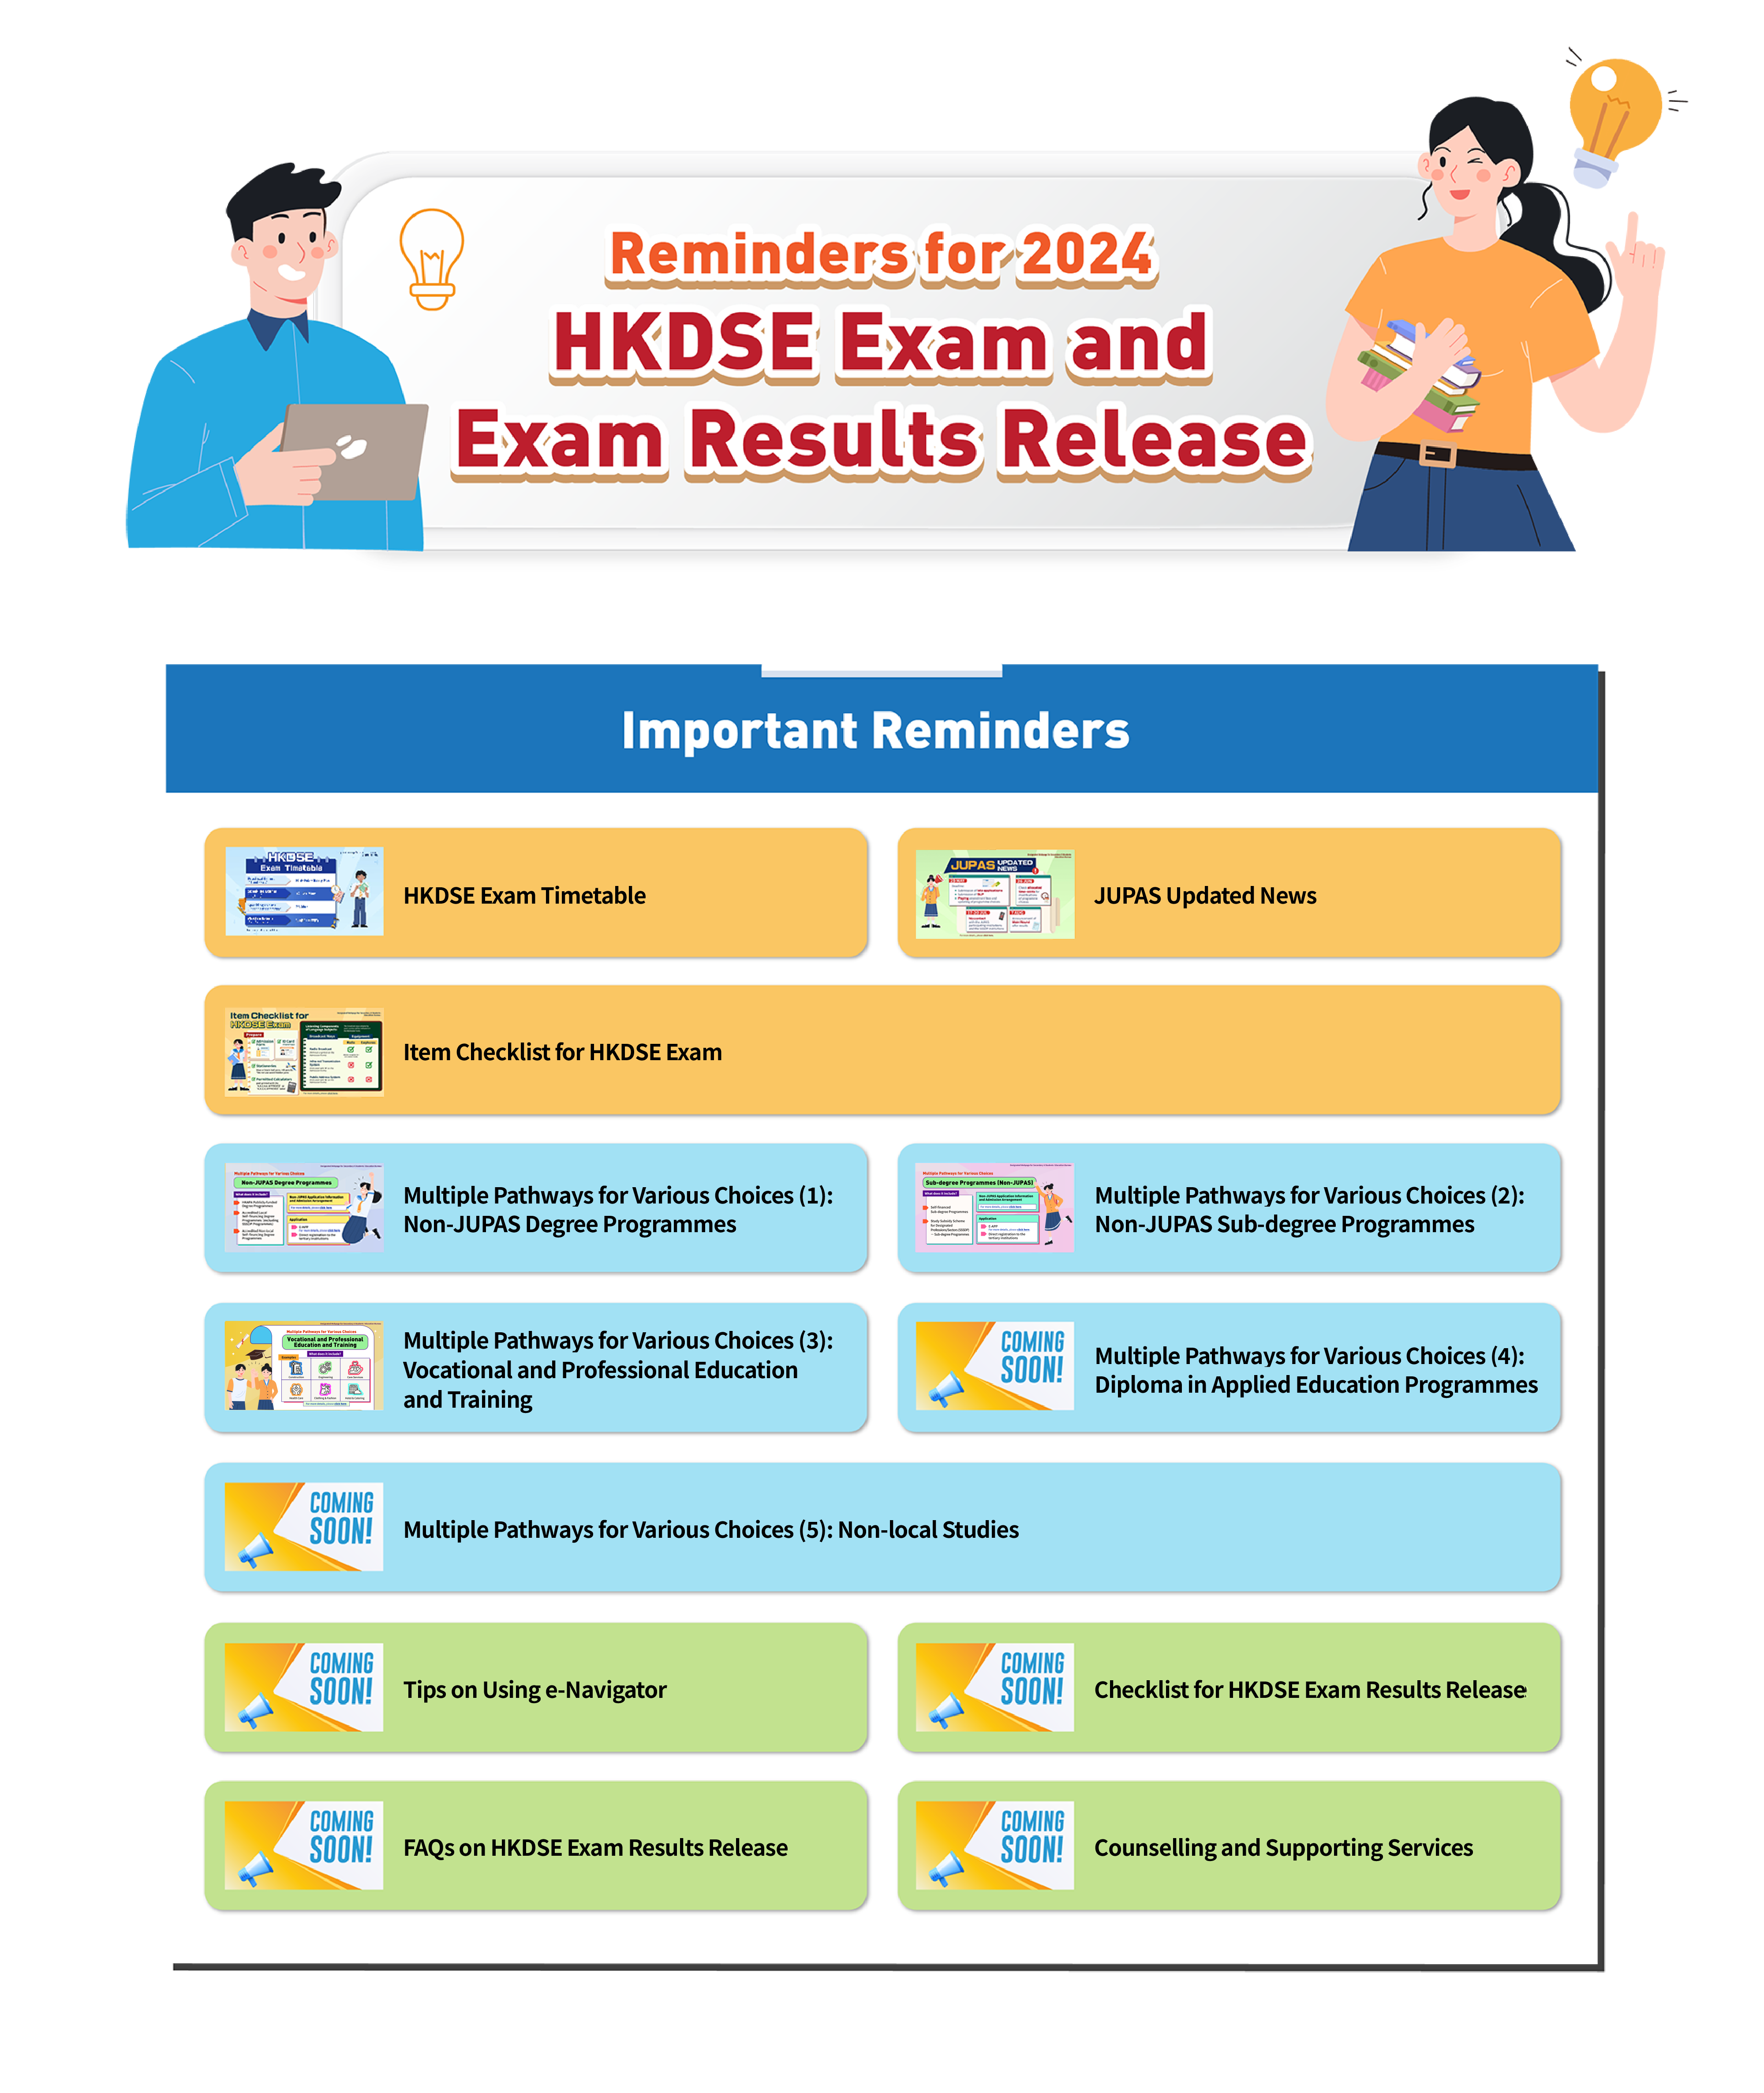 Reminders for 2024 HKDSE Exam and Exam Results Release